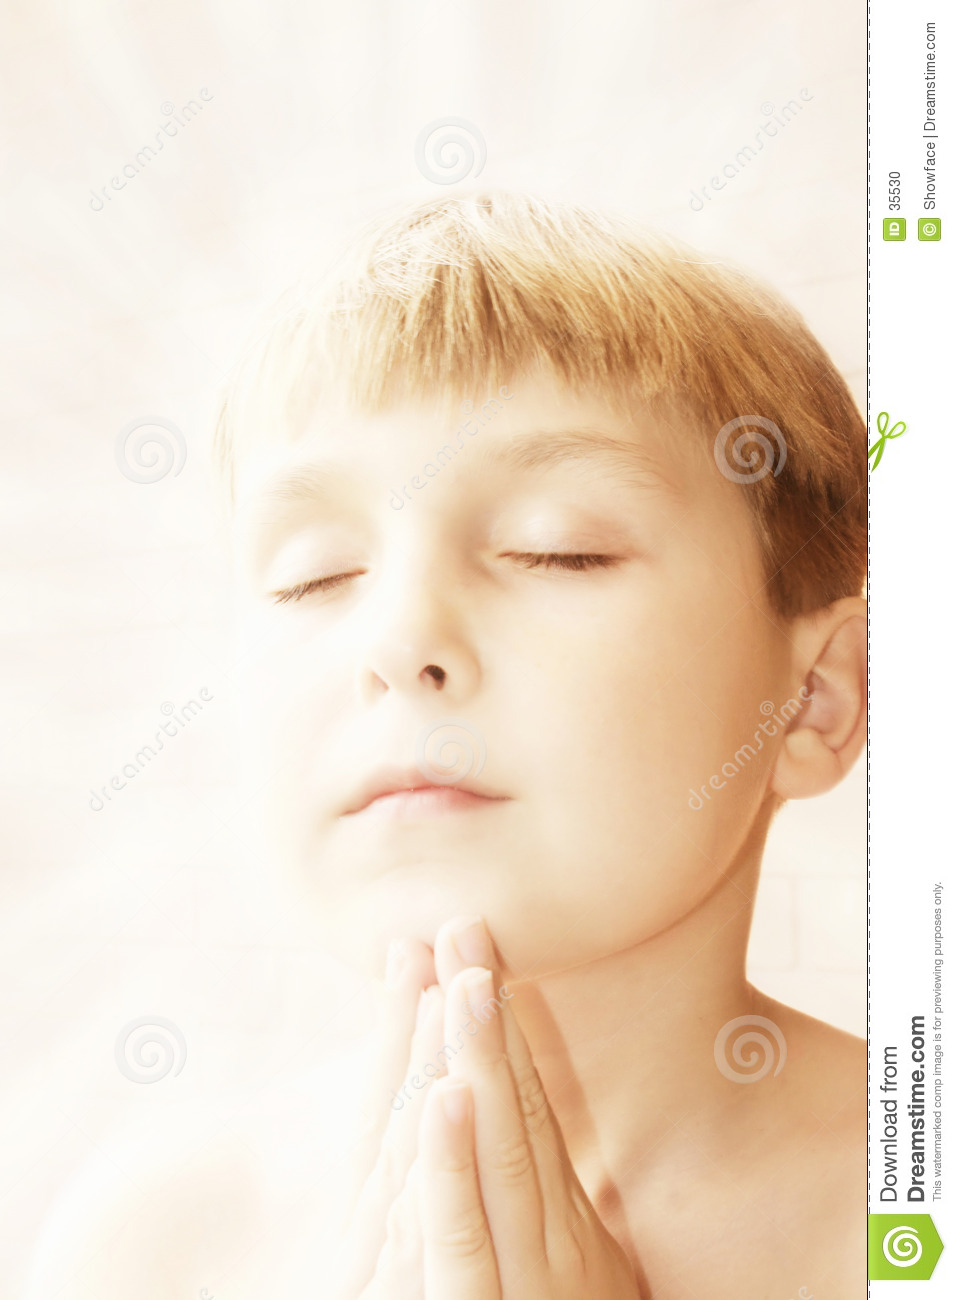 Hands Together In Prayer With Divine Aura 0 3 Softness Has Been Added